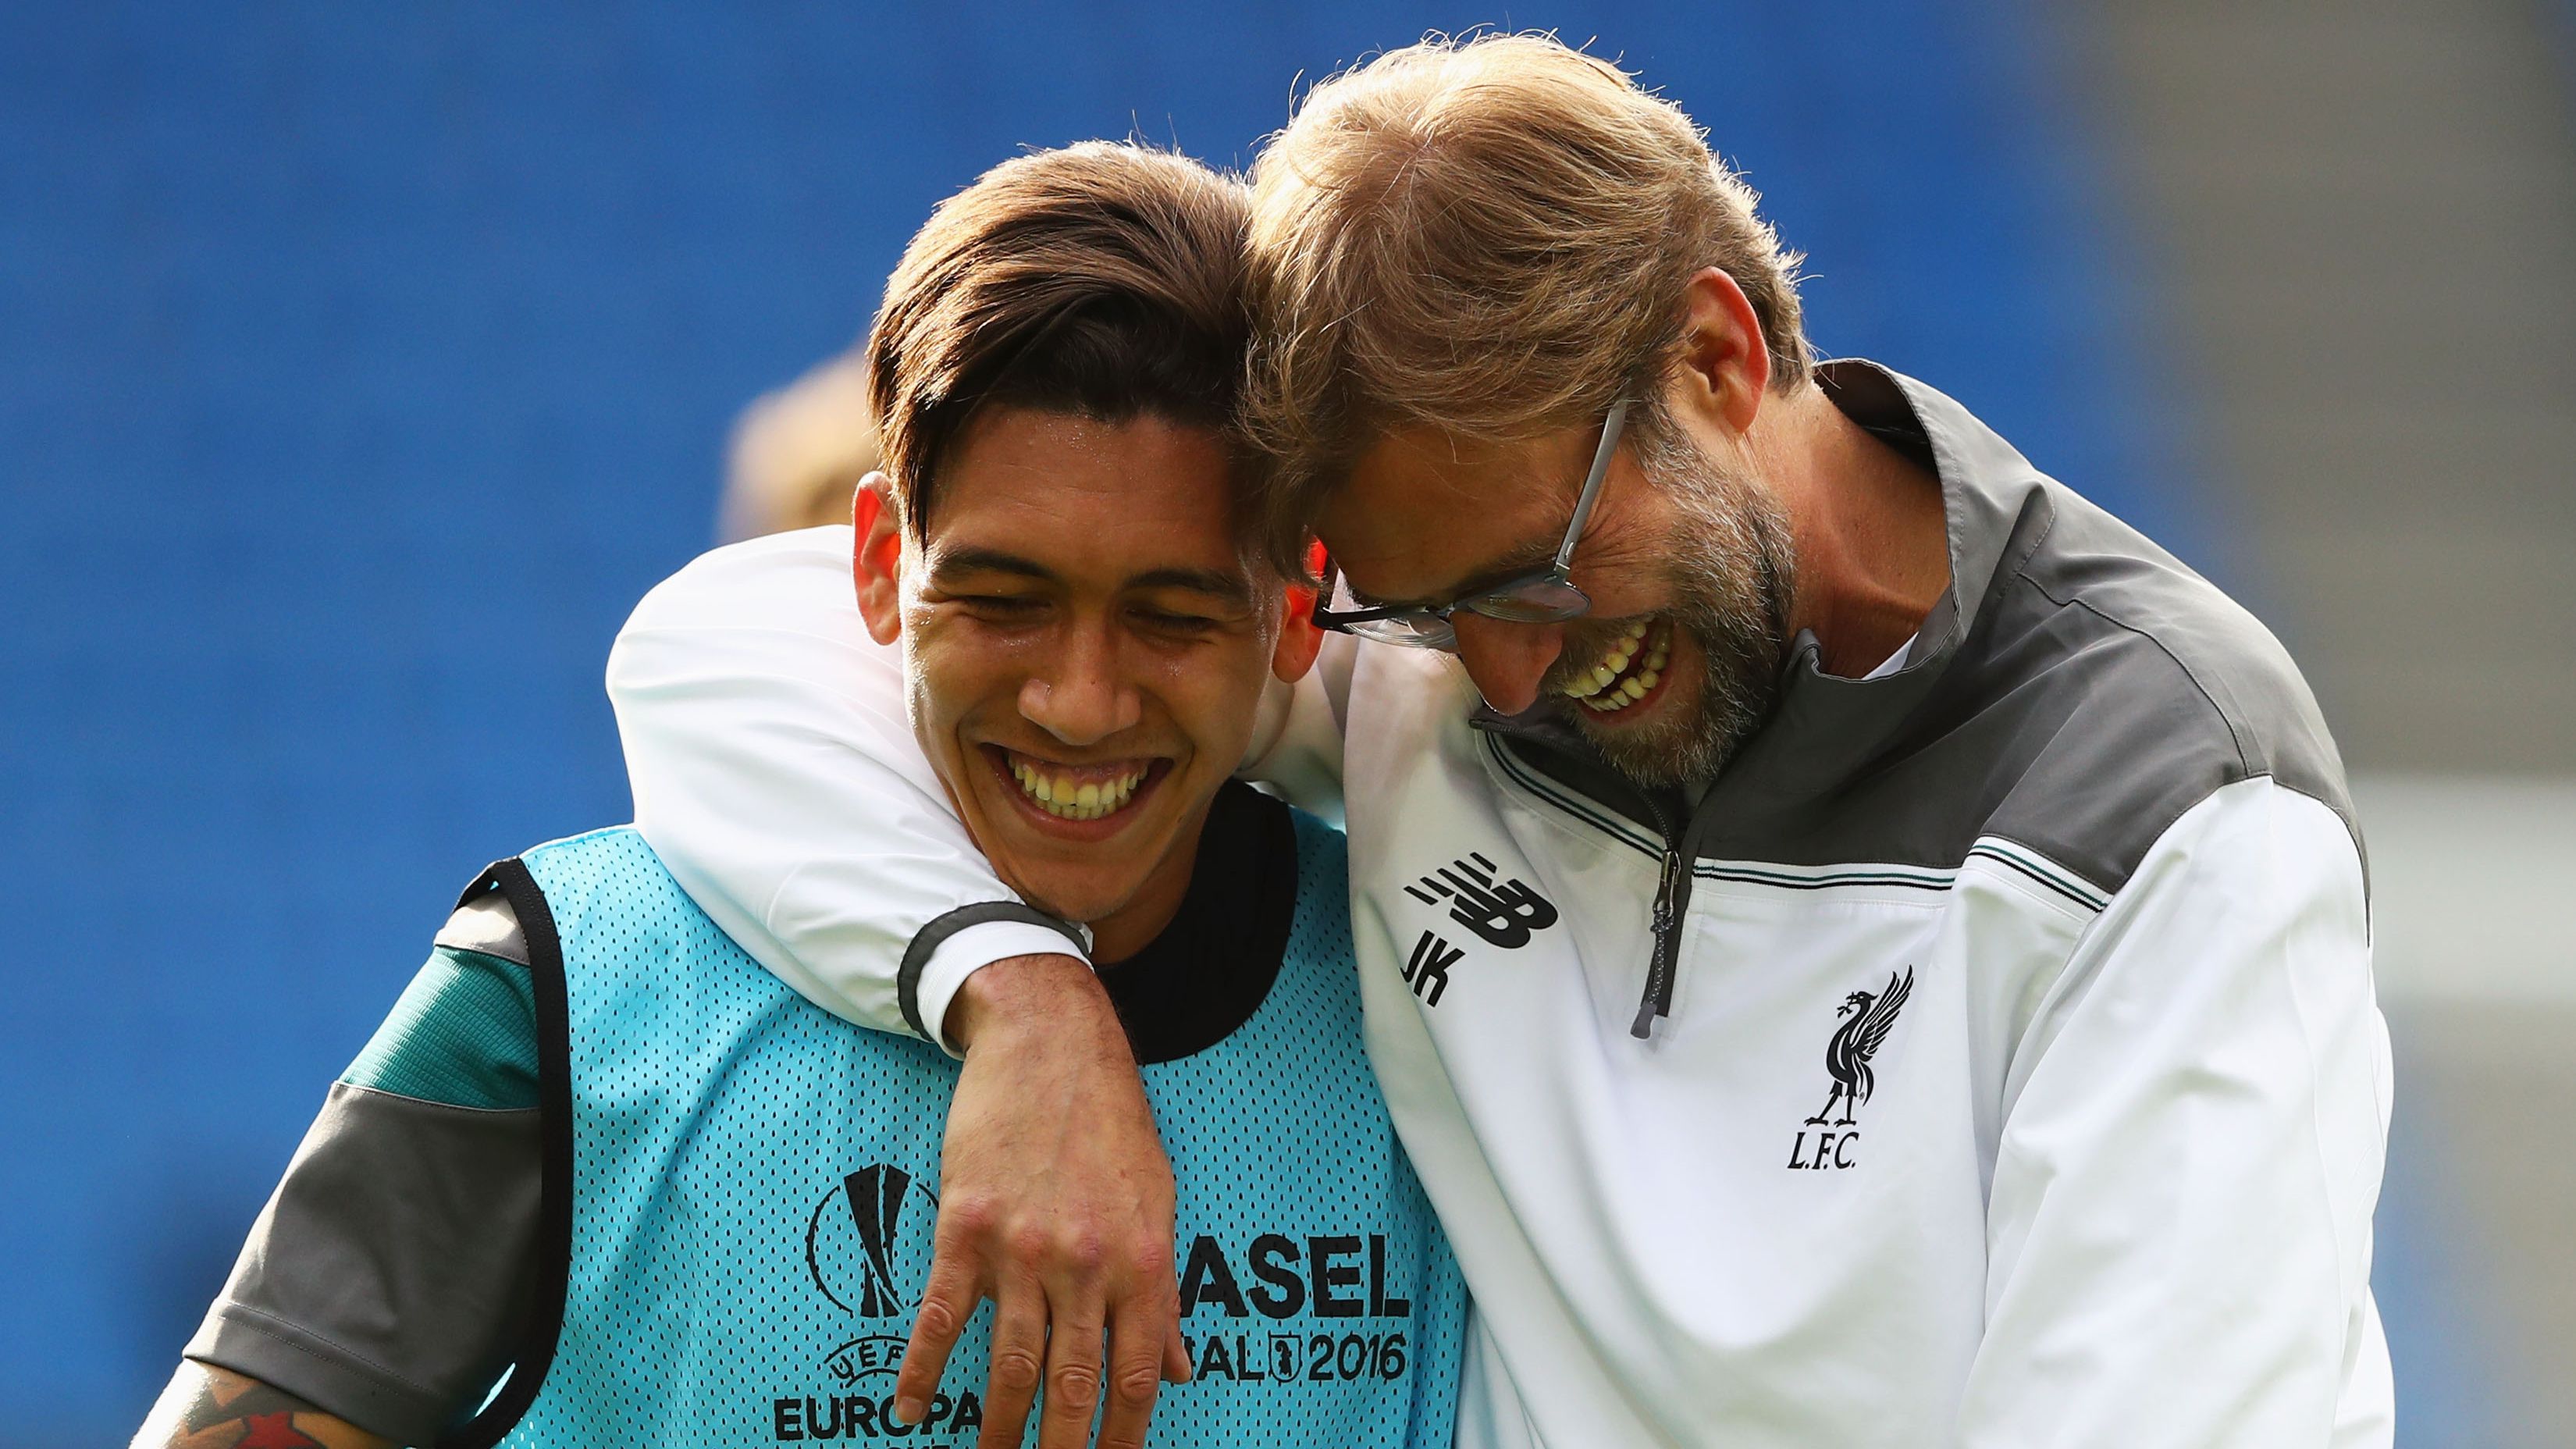 Roberto Firmino has been at Liverpool since 2015